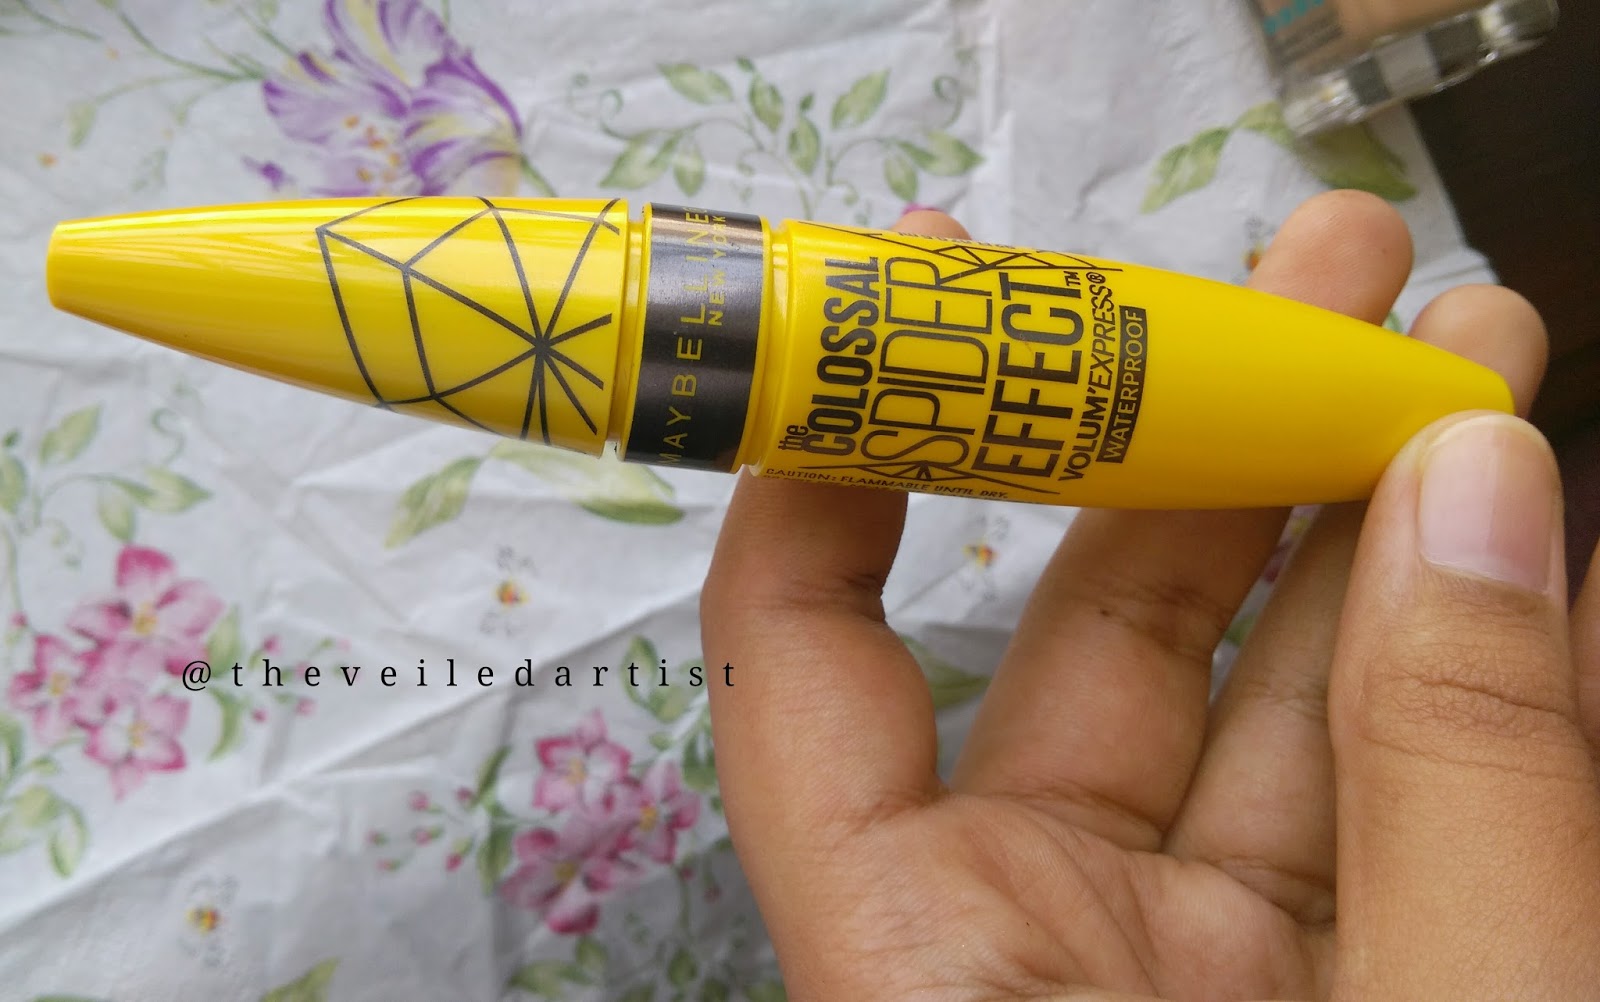 Volume Express Spider Effect Waterproof Mascara and Swatches - The Veiled Artist